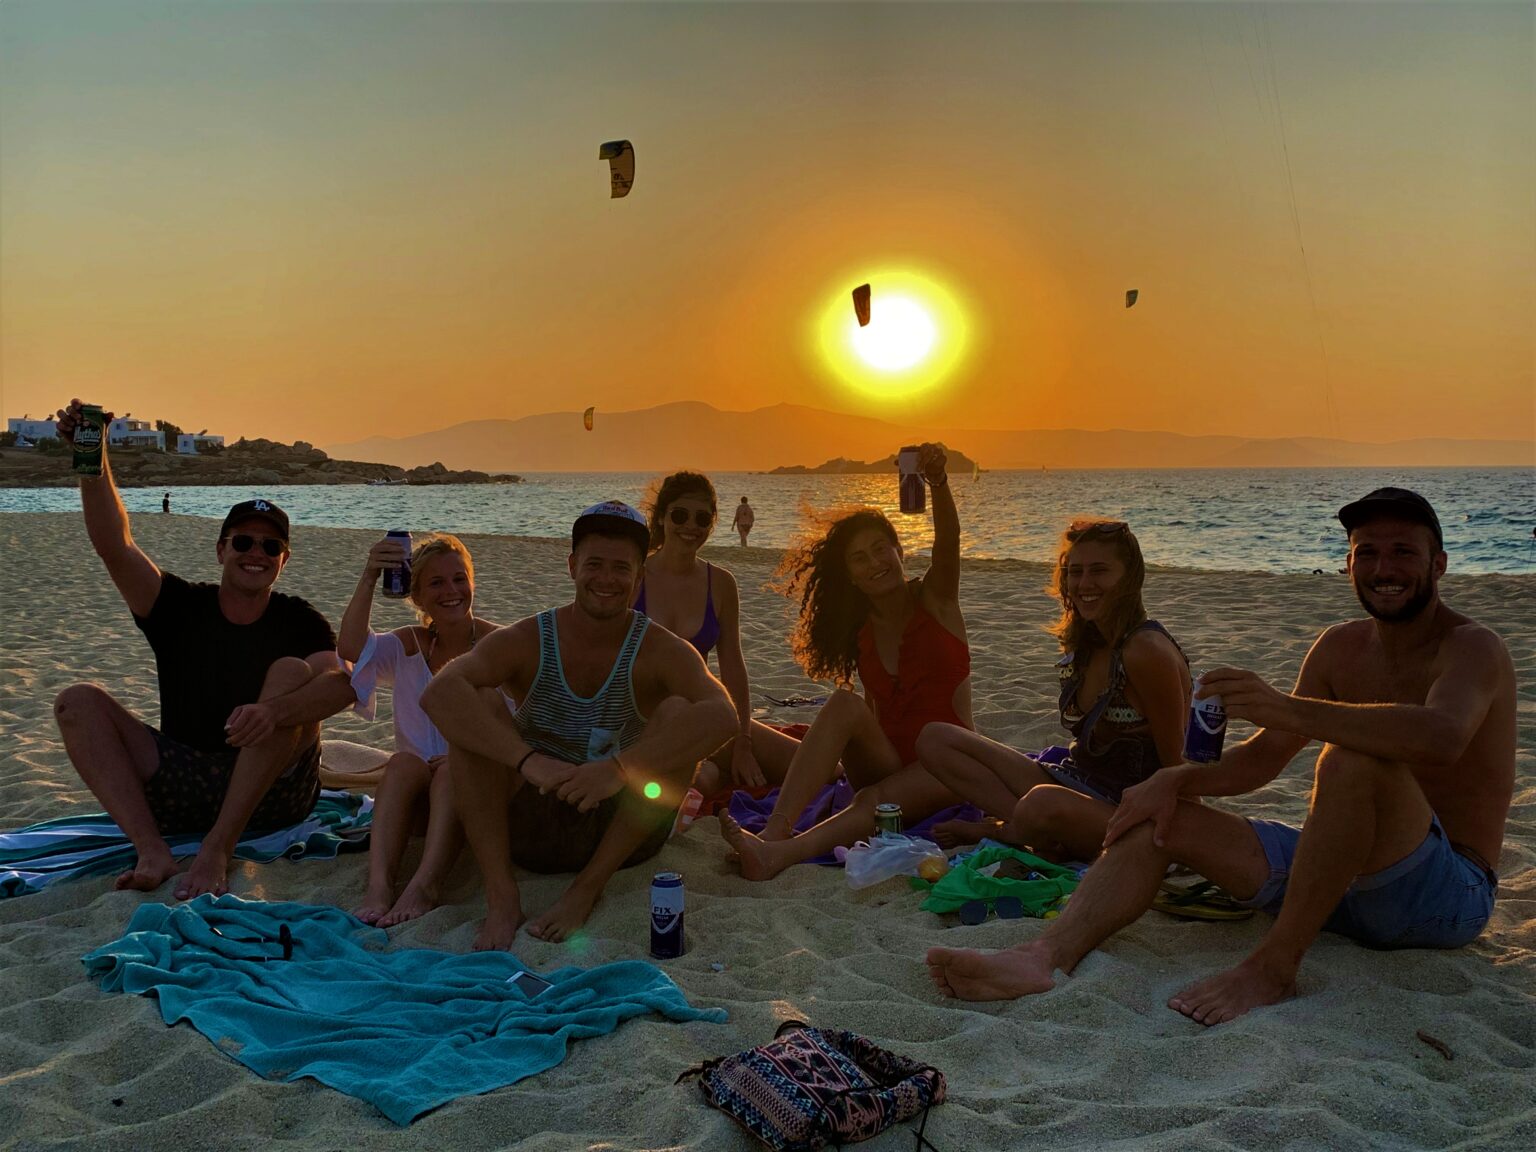 At the end of the day the participants from our kite camp enjoy the sunset with a beer.